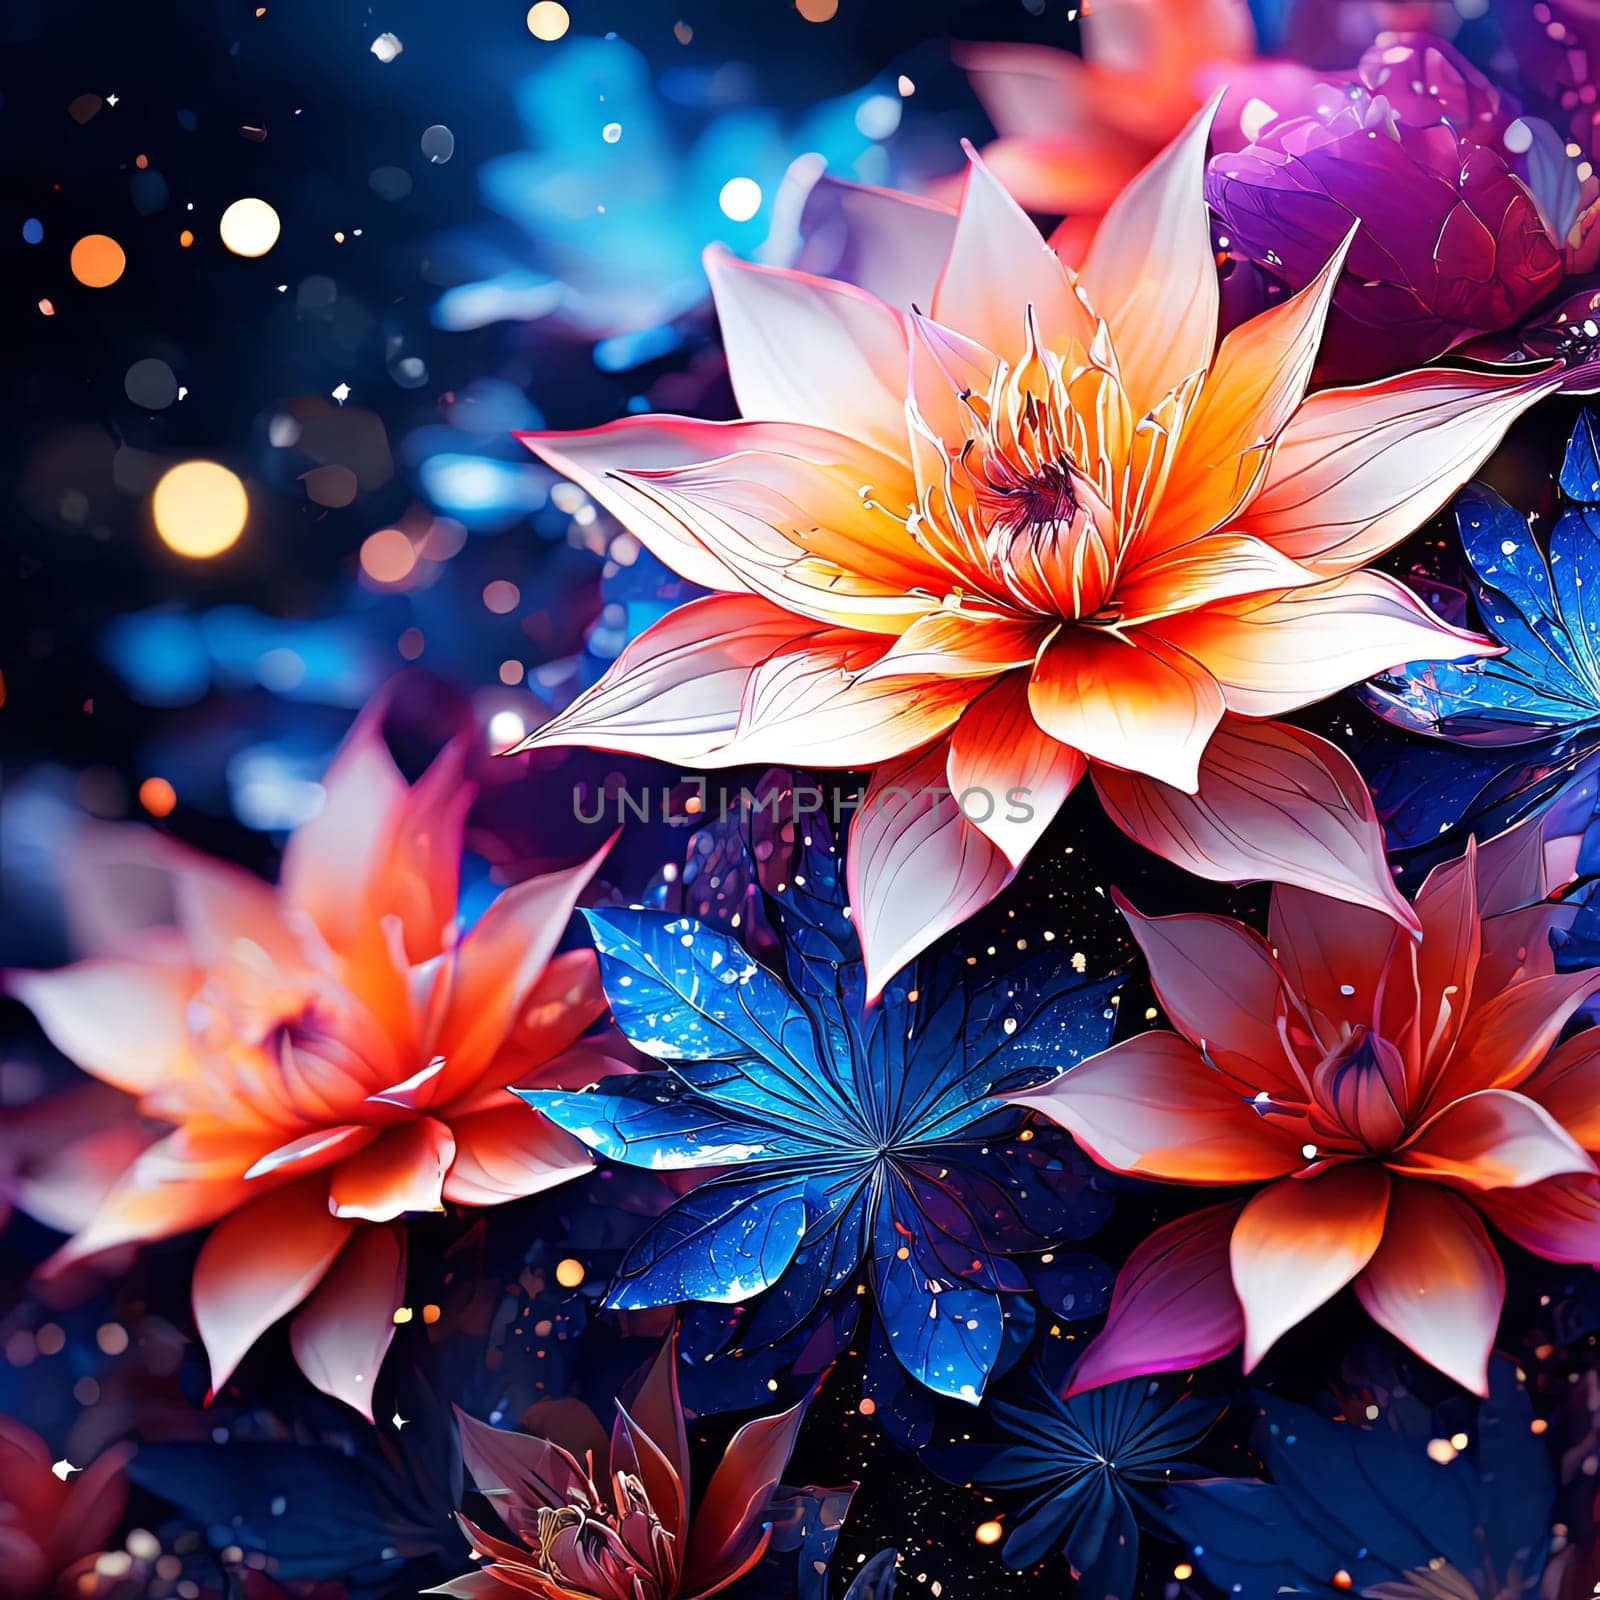 lotus flowers set against serene night sky filled with sparkling stars, creating peaceful, enchanting scene that symbolizes purity, enlightenment, tranquility. For website design, print. by Angelsmoon